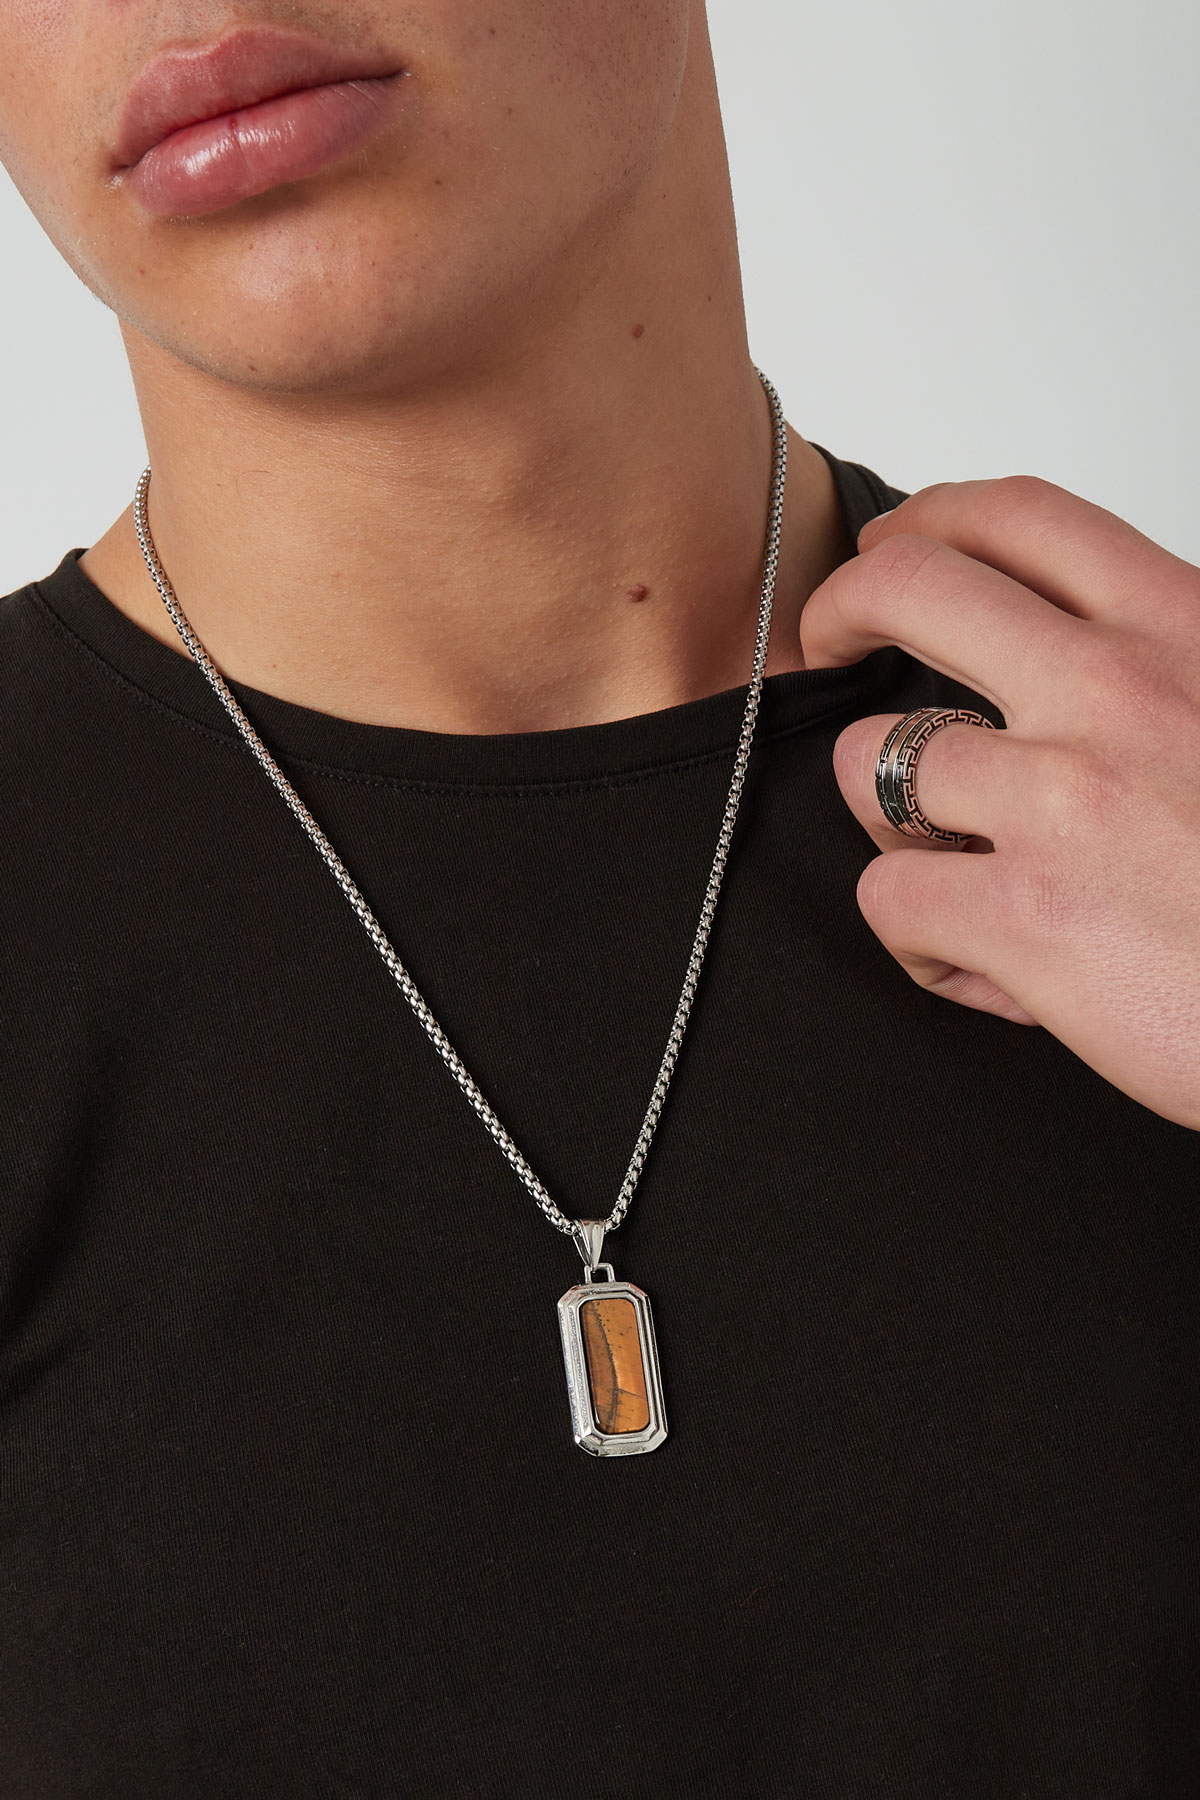 Men's necklace with pendant - brown Picture6